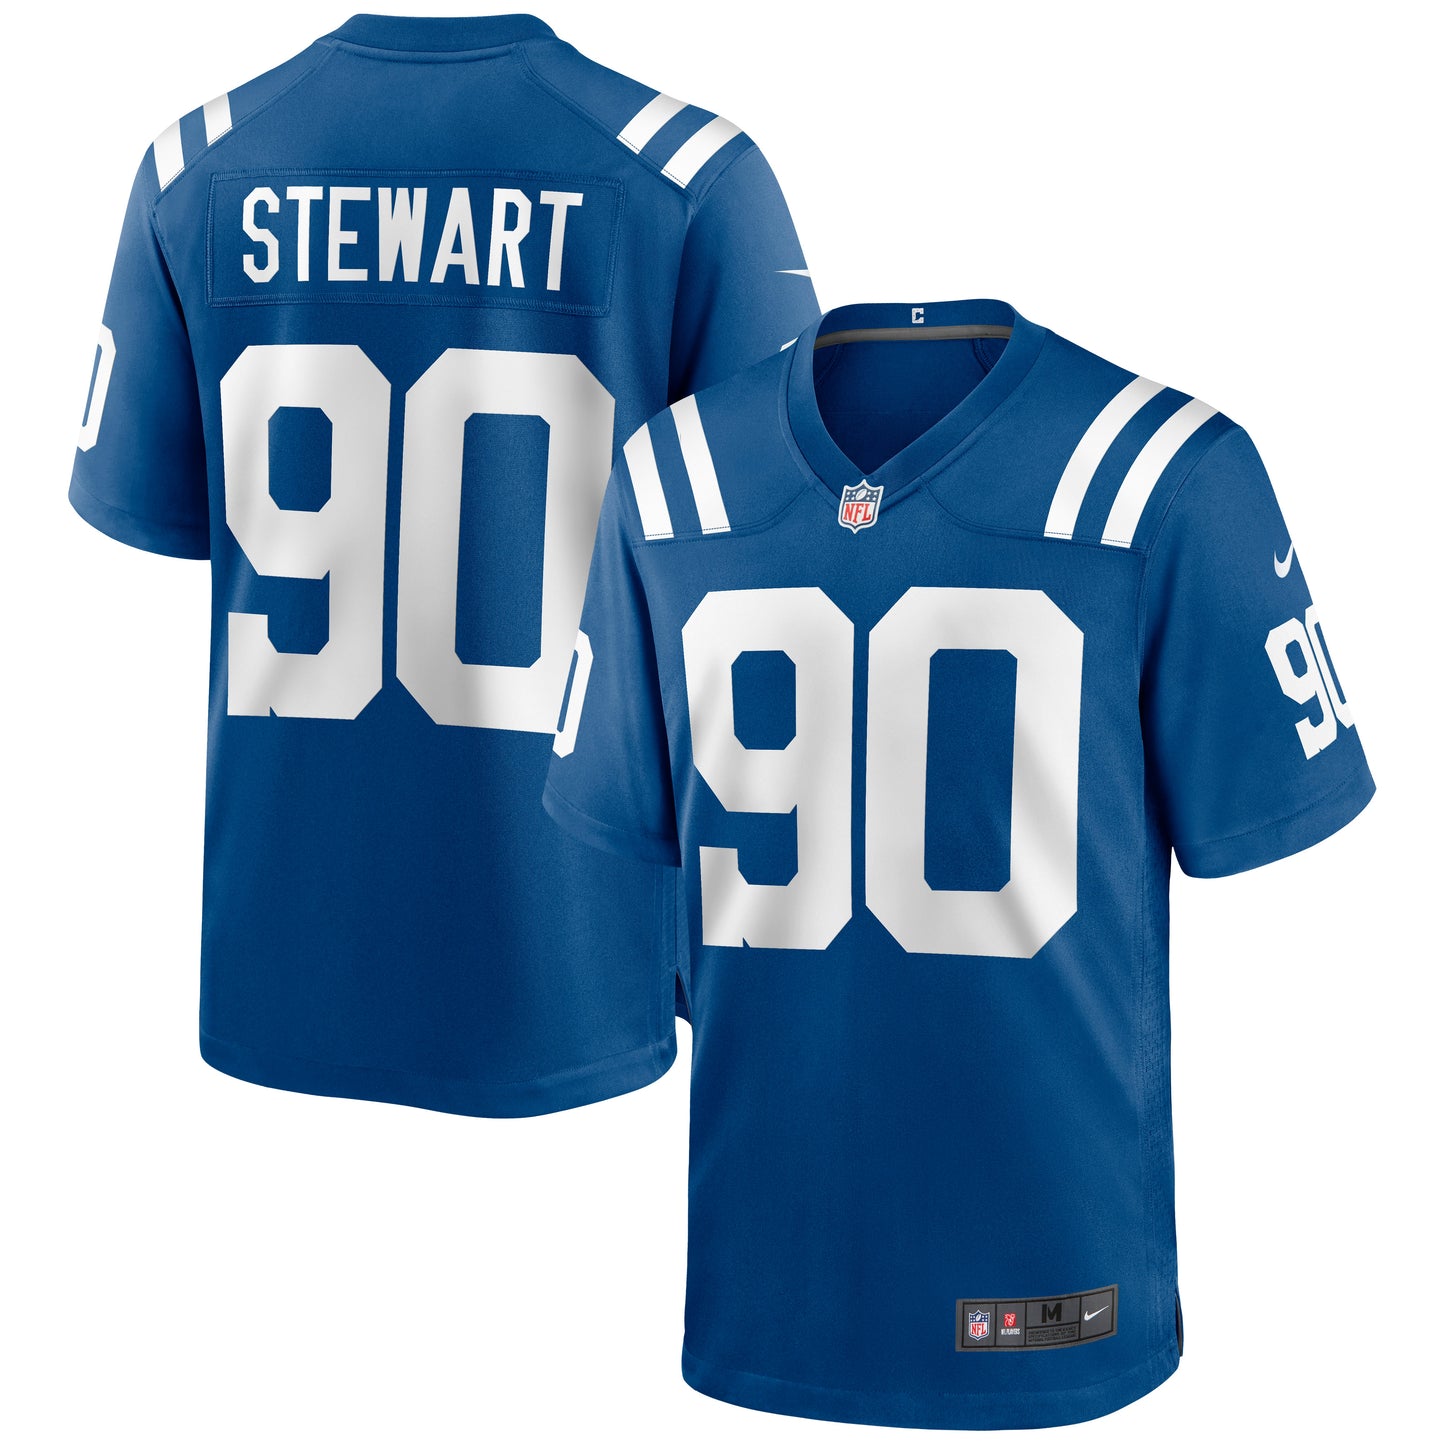 Grover Stewart Indianapolis Colts Nike Game Jersey - Royal